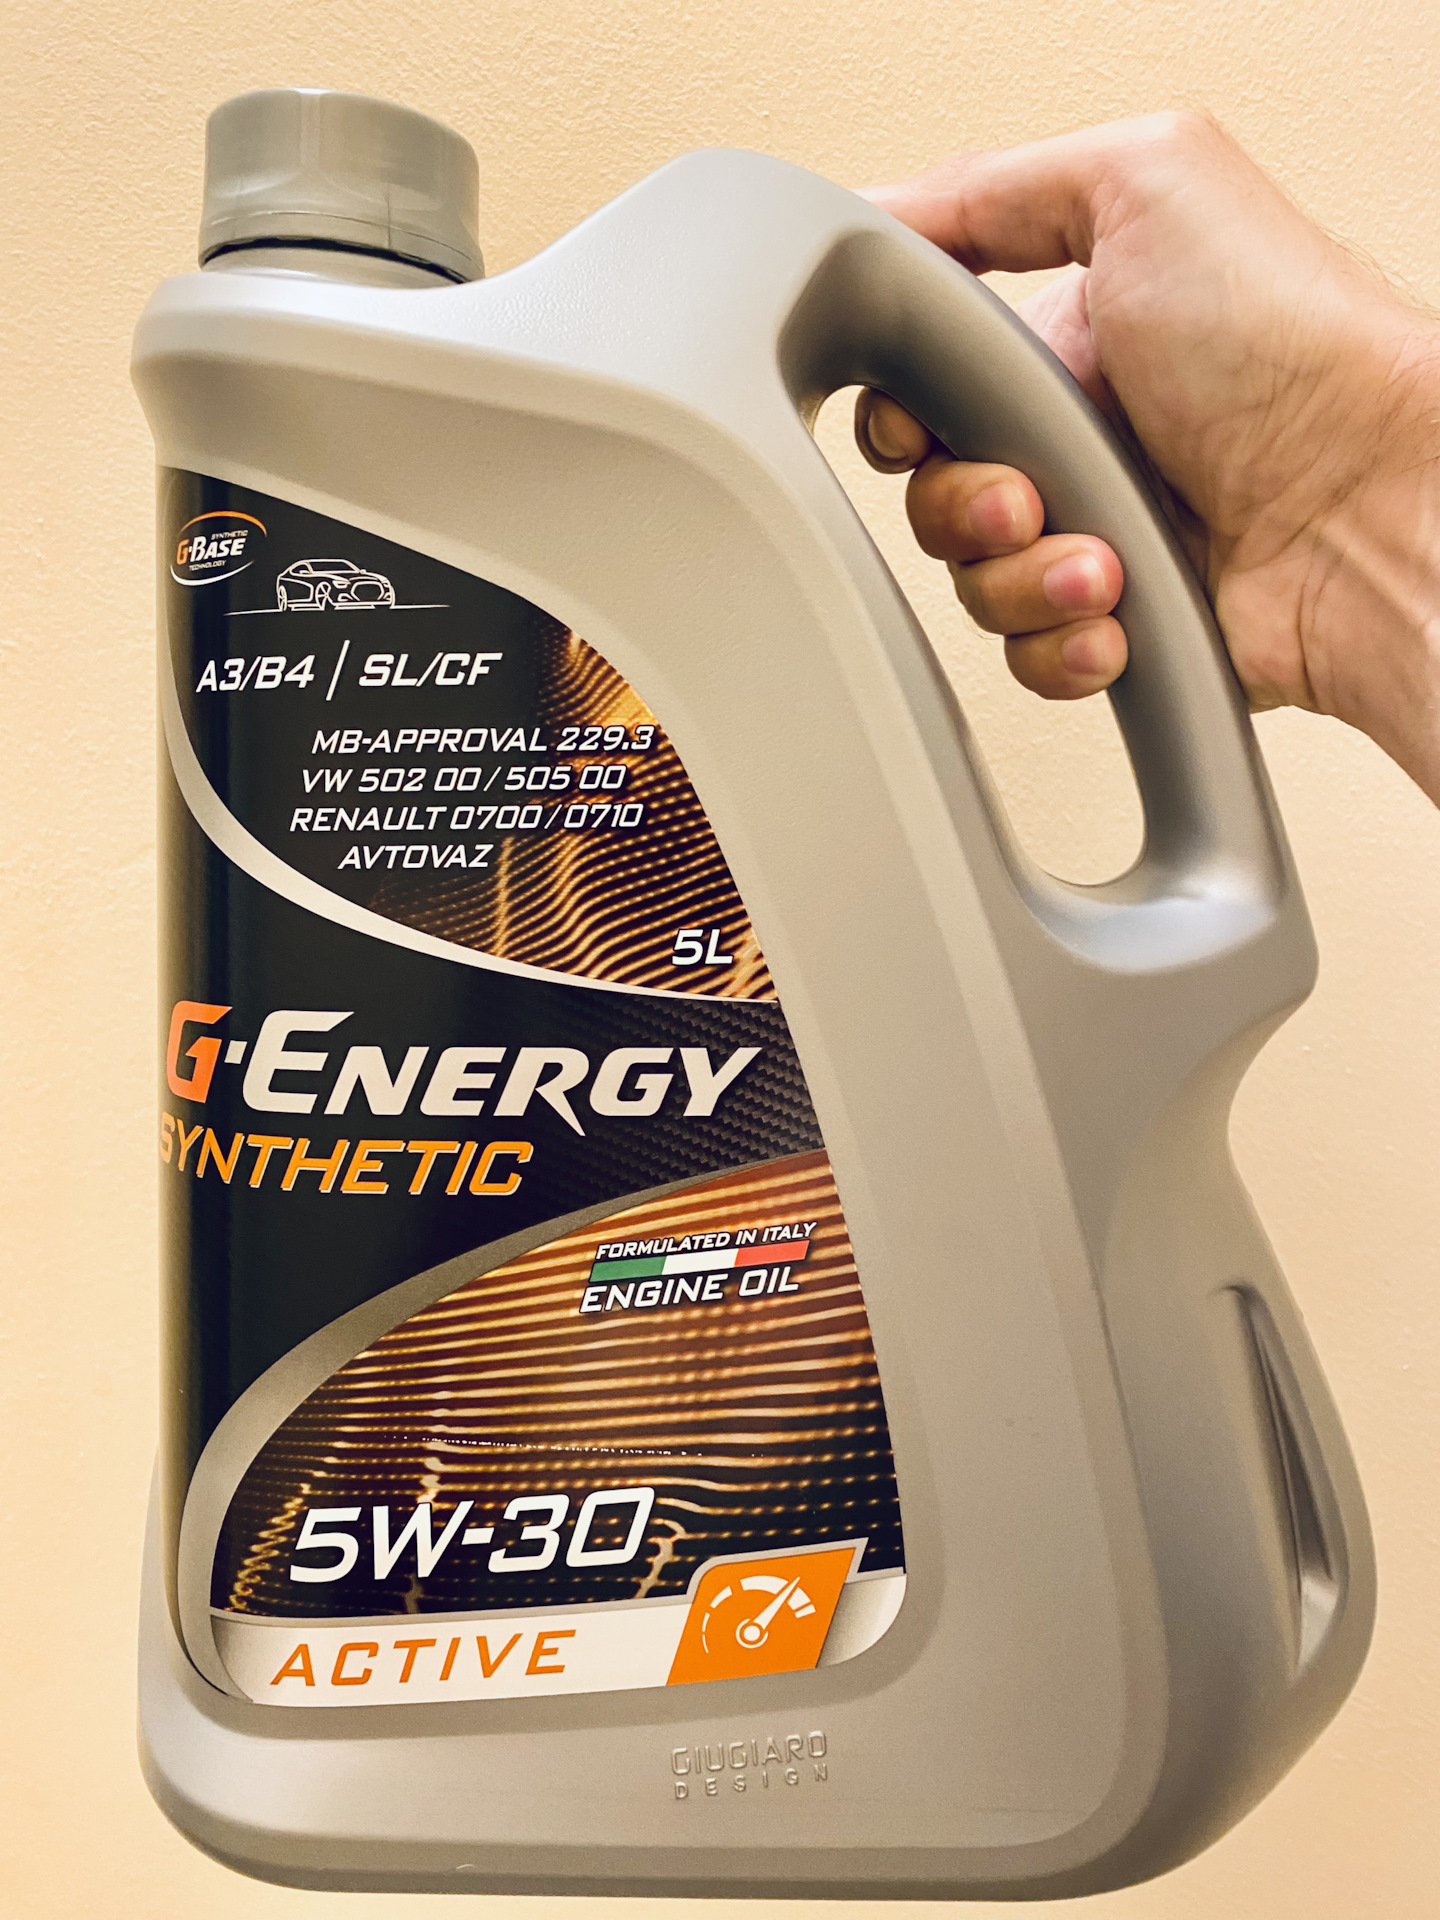 Energy synthetic active 5w 30. G-Energy Synthetic Active 5w-30.